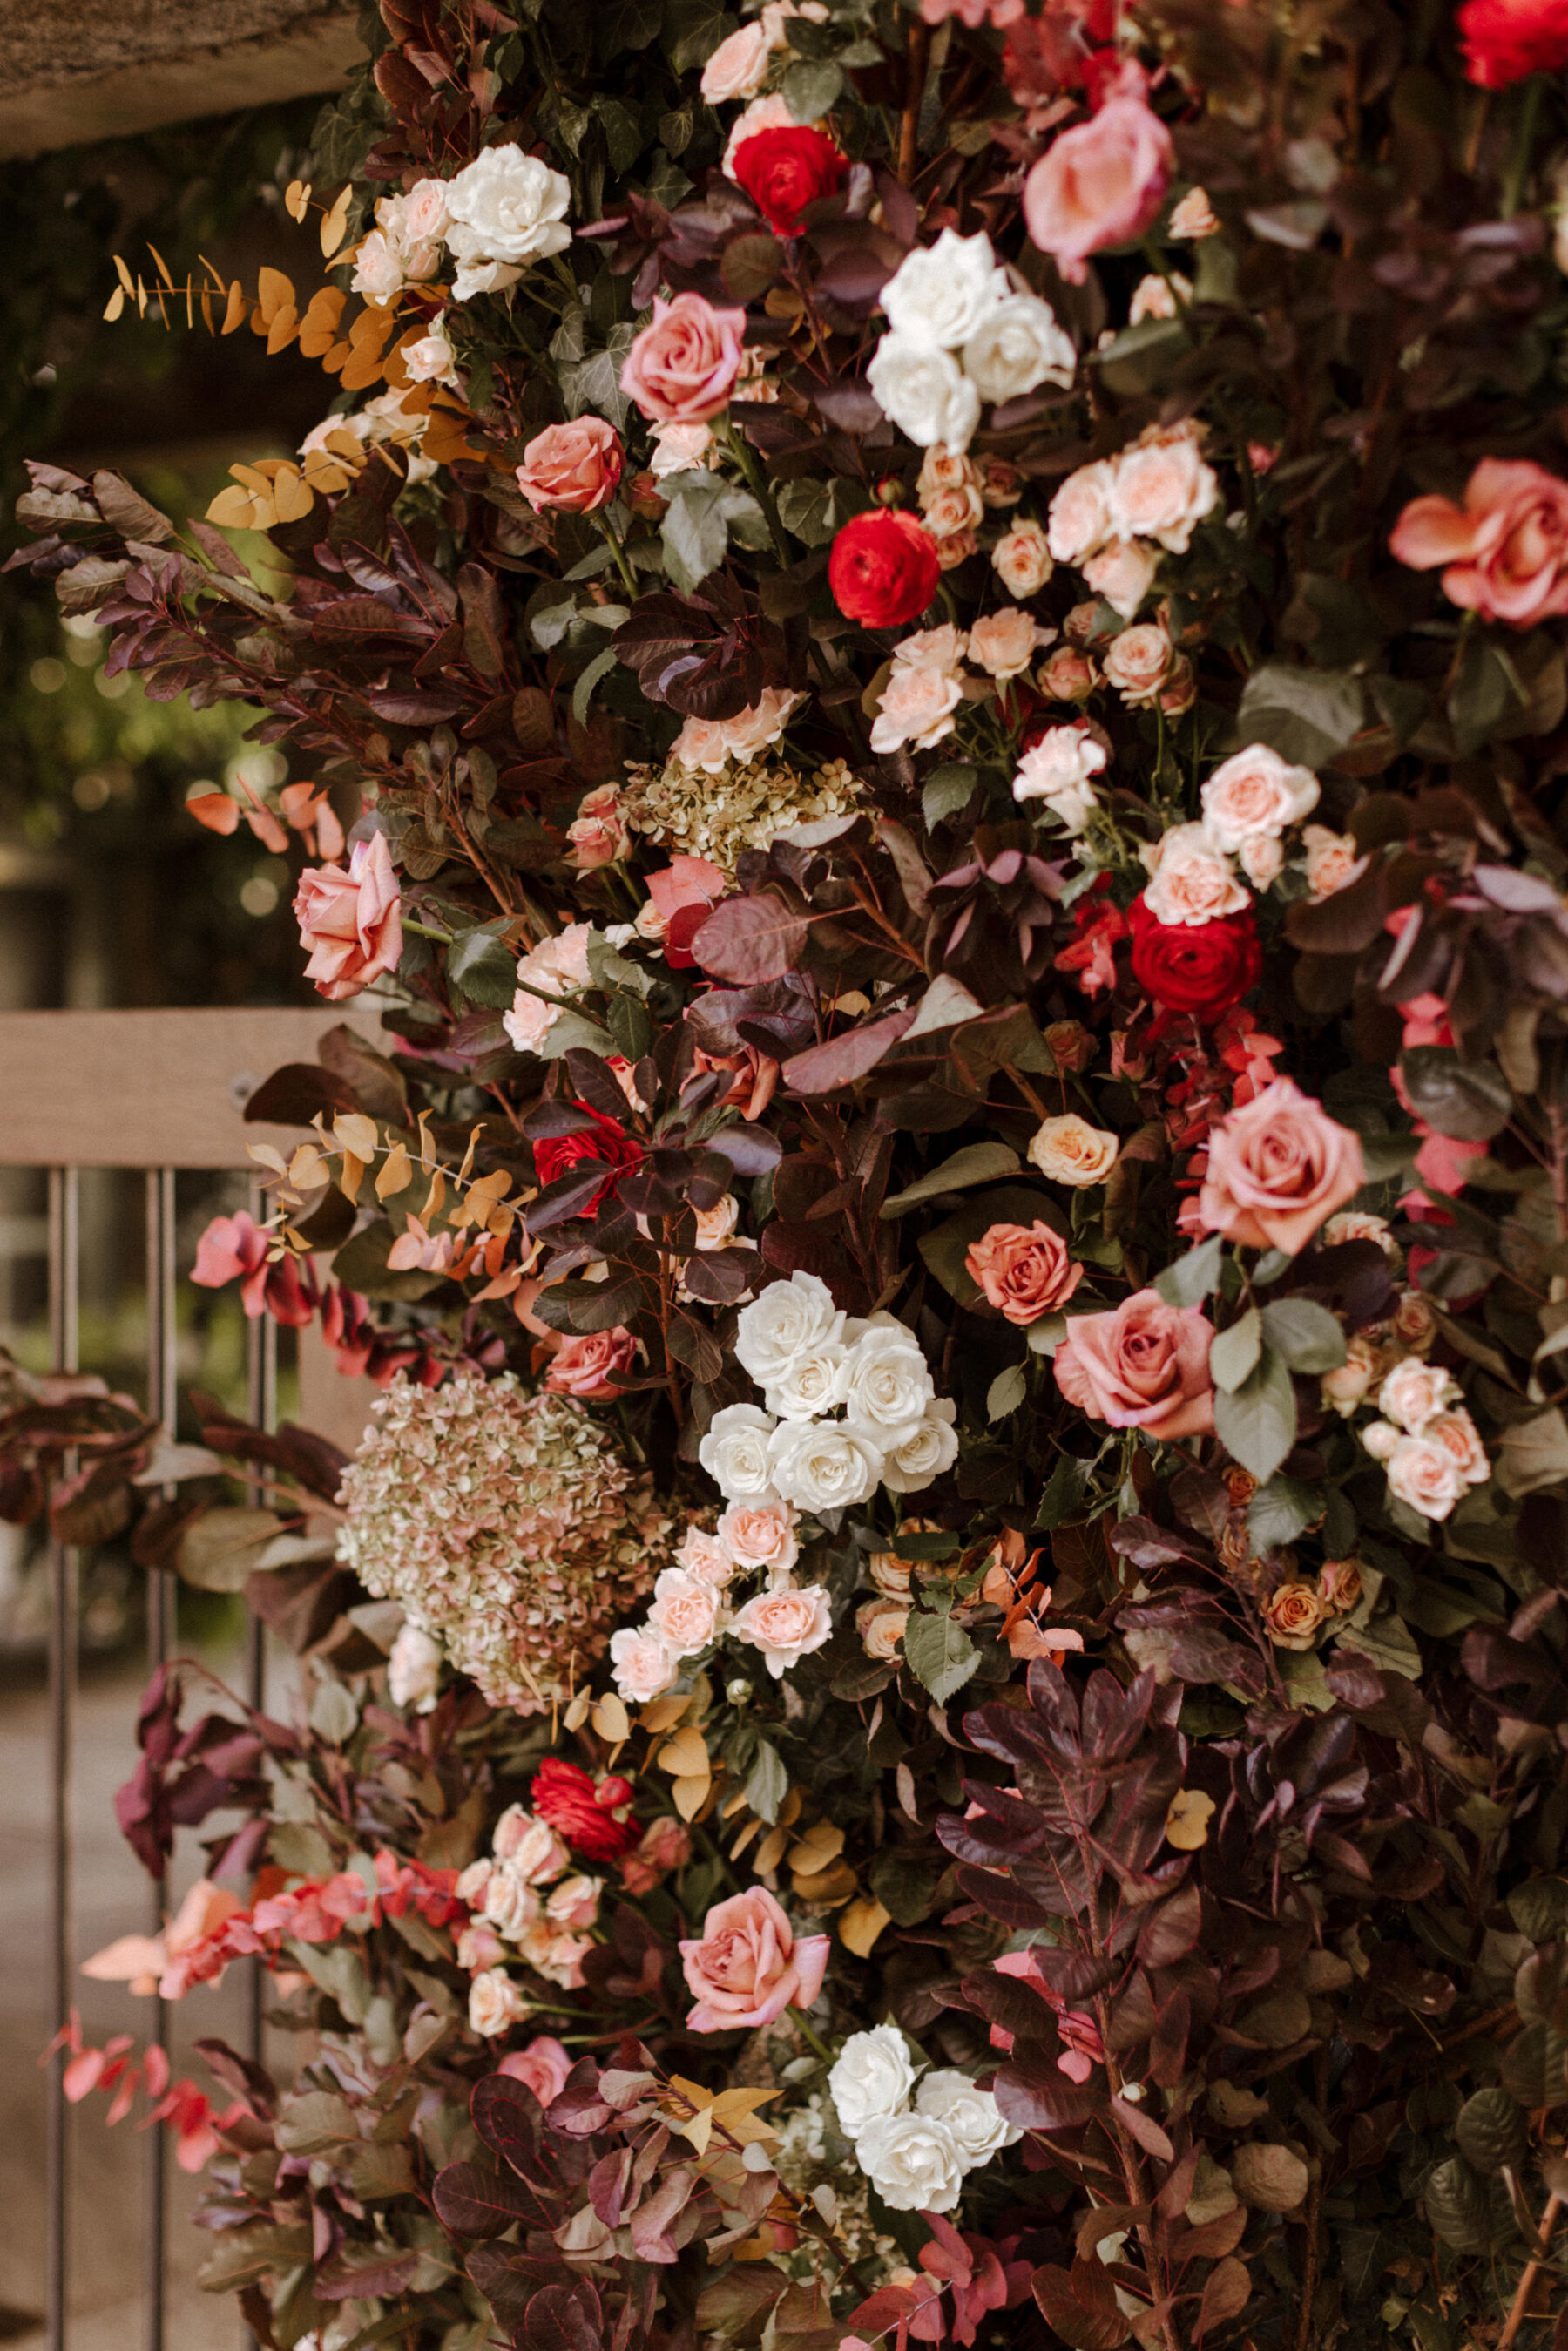 Autumn wedding flowers forming part of a floral arch.